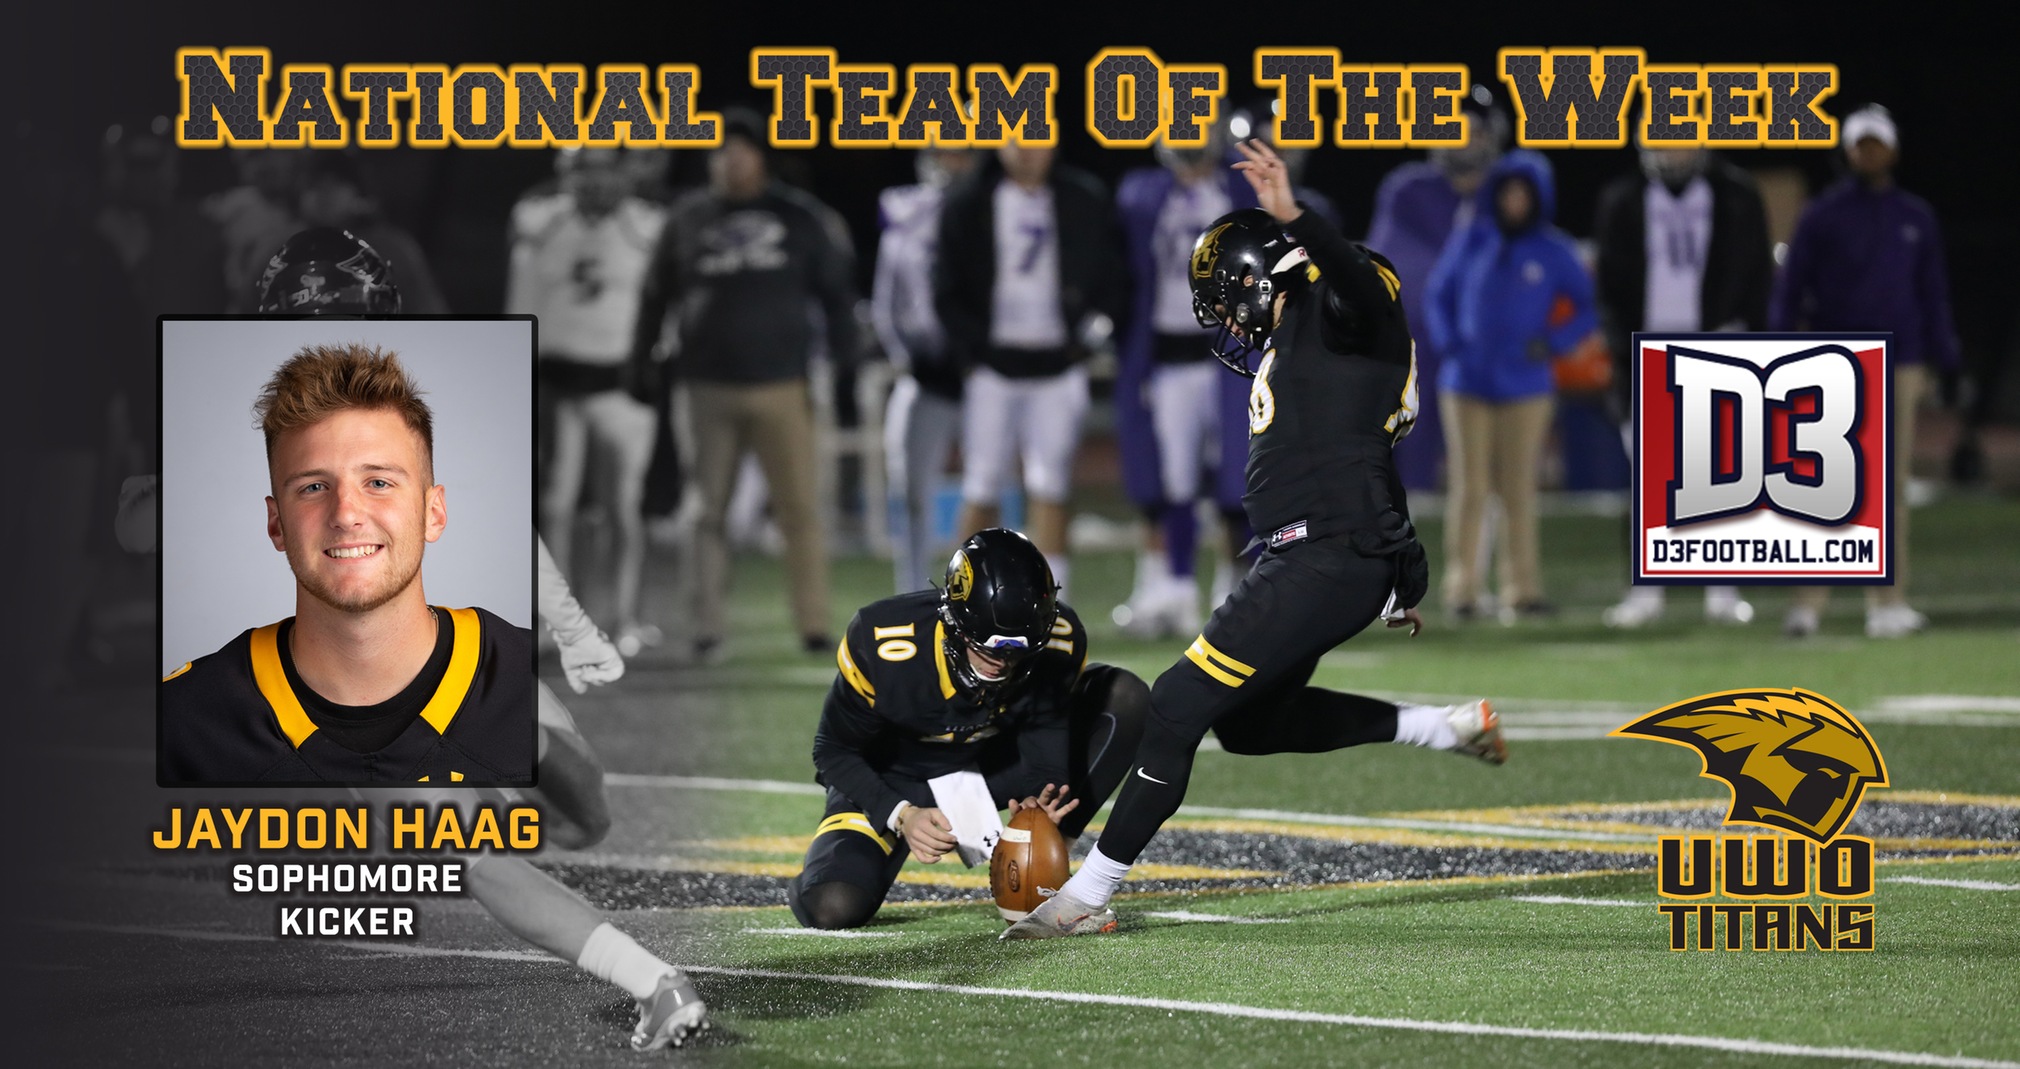 Haag Named To National Football Team Of The Week